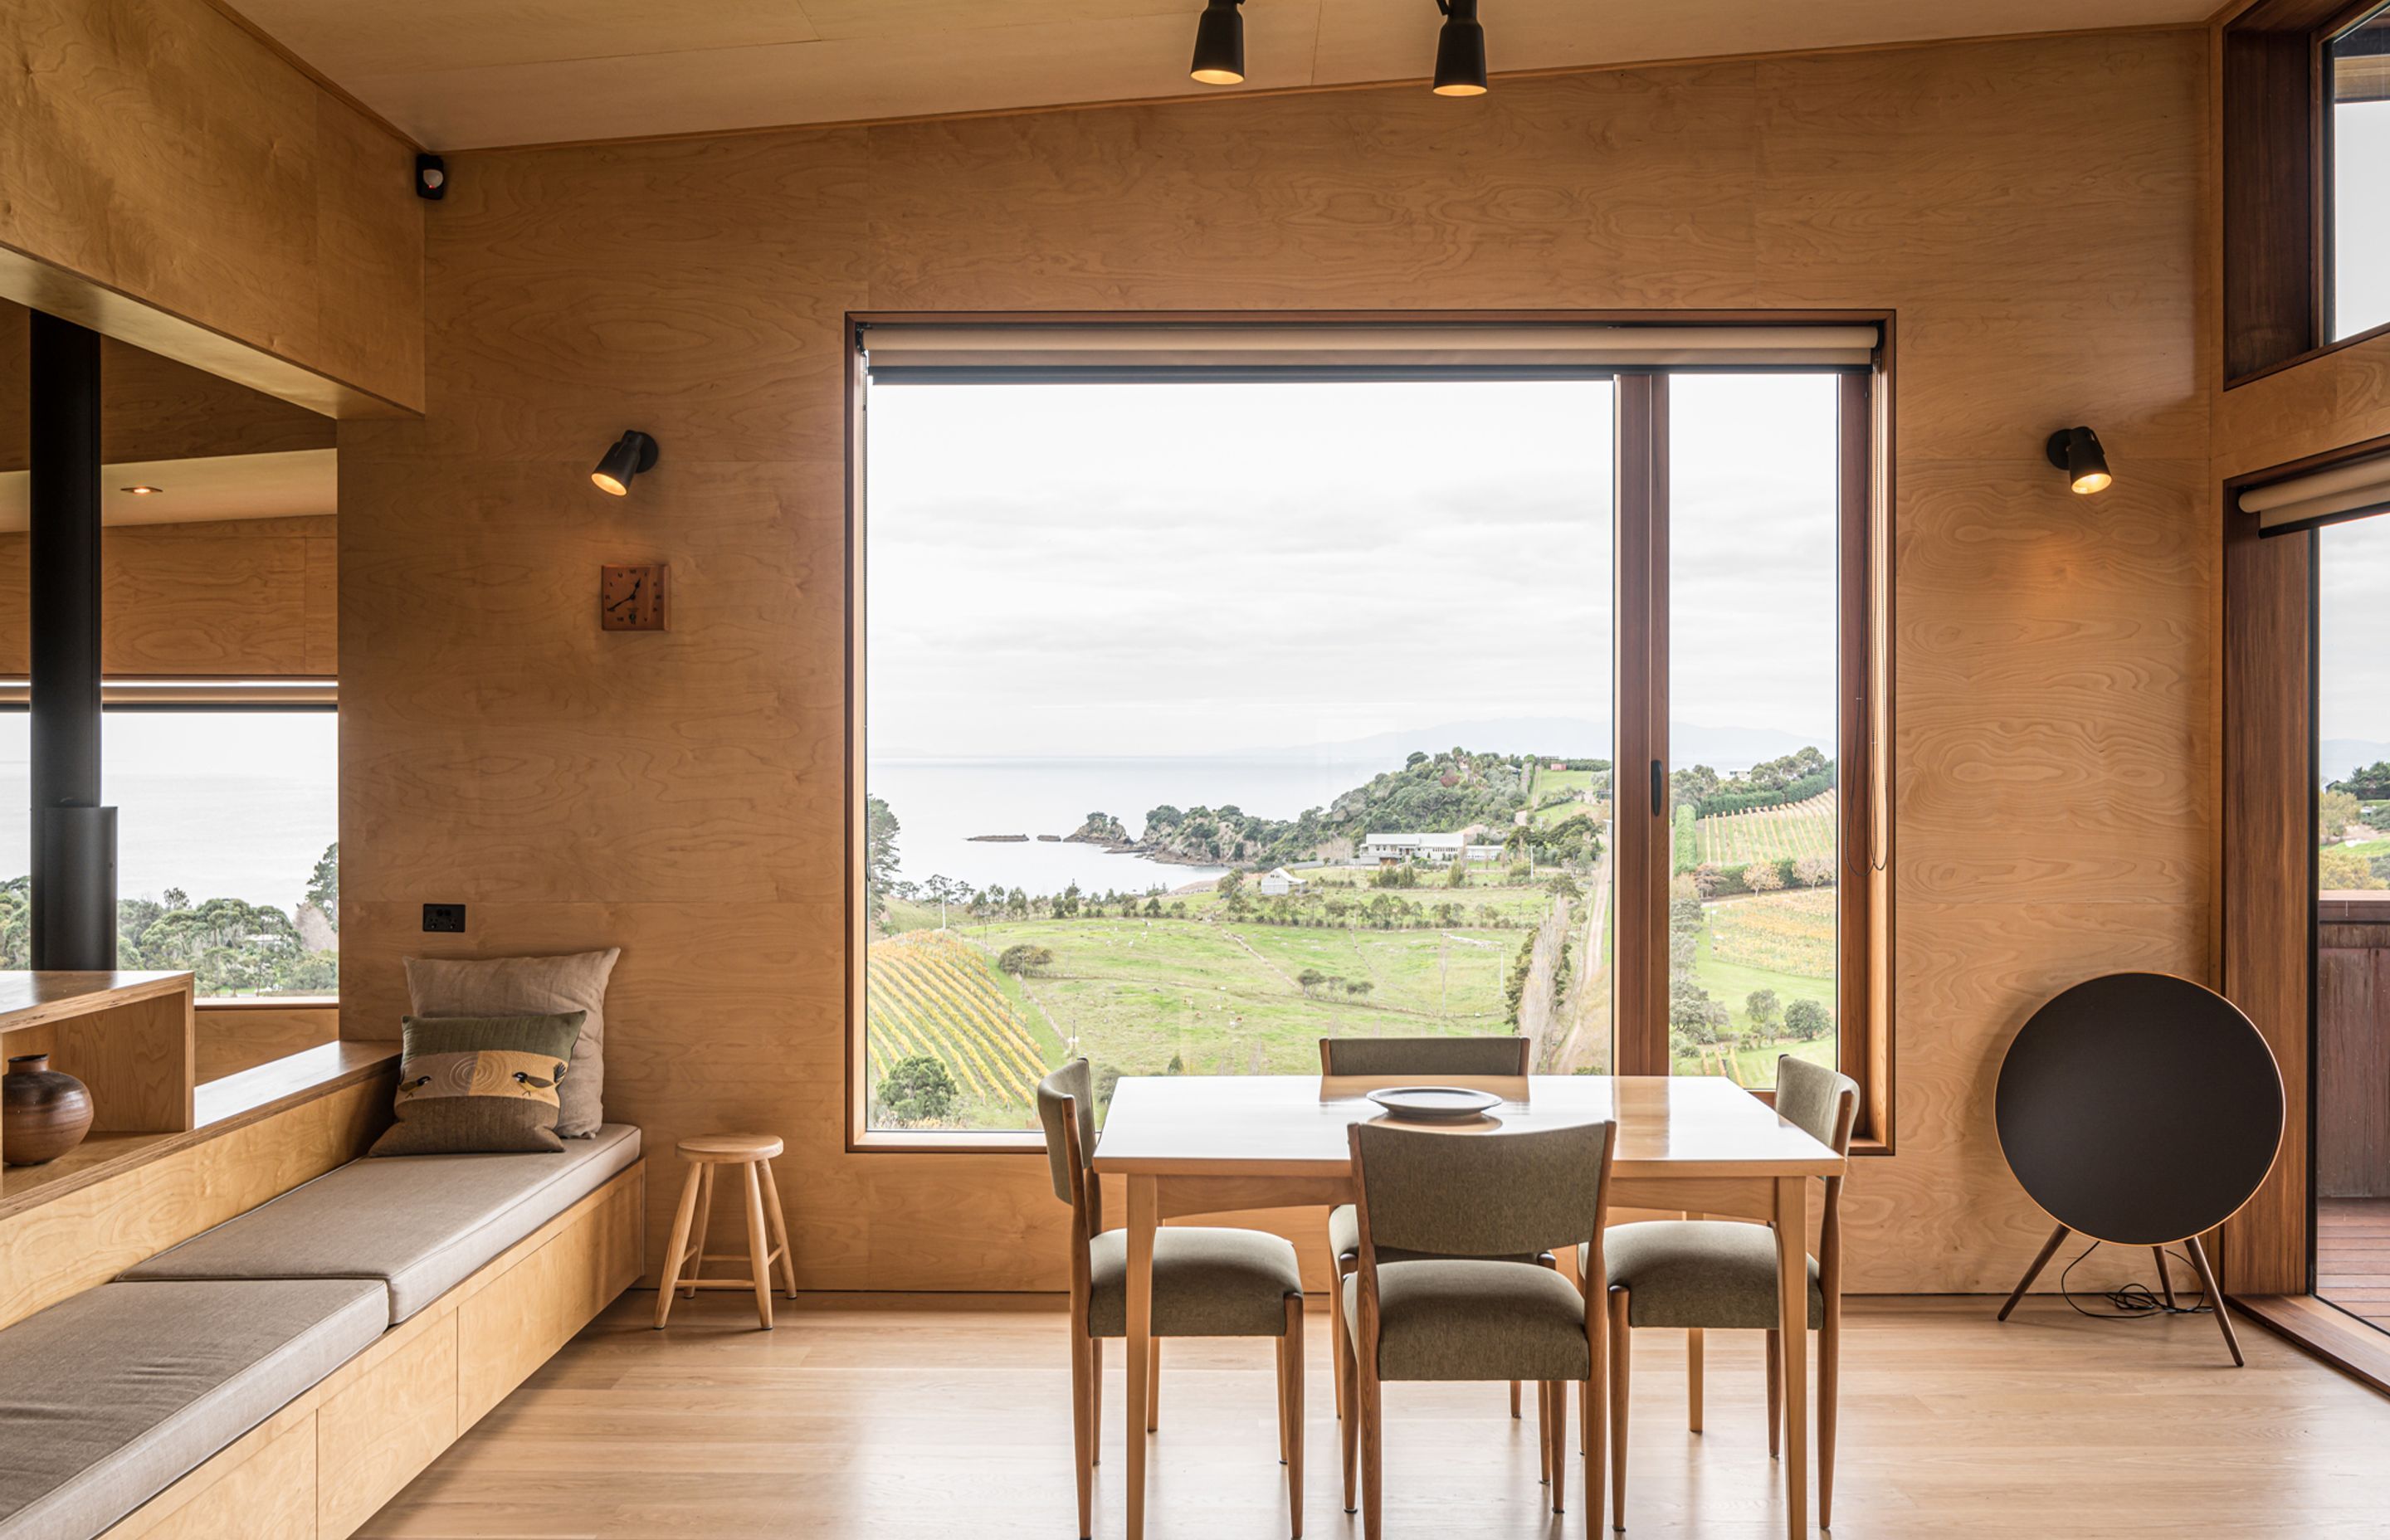 Overlooking the vineyard, a casual dining area is lined in elite birch plywood by Plytech and American white oak flooring to match the rest of the home. Photograph by ArchiPro.